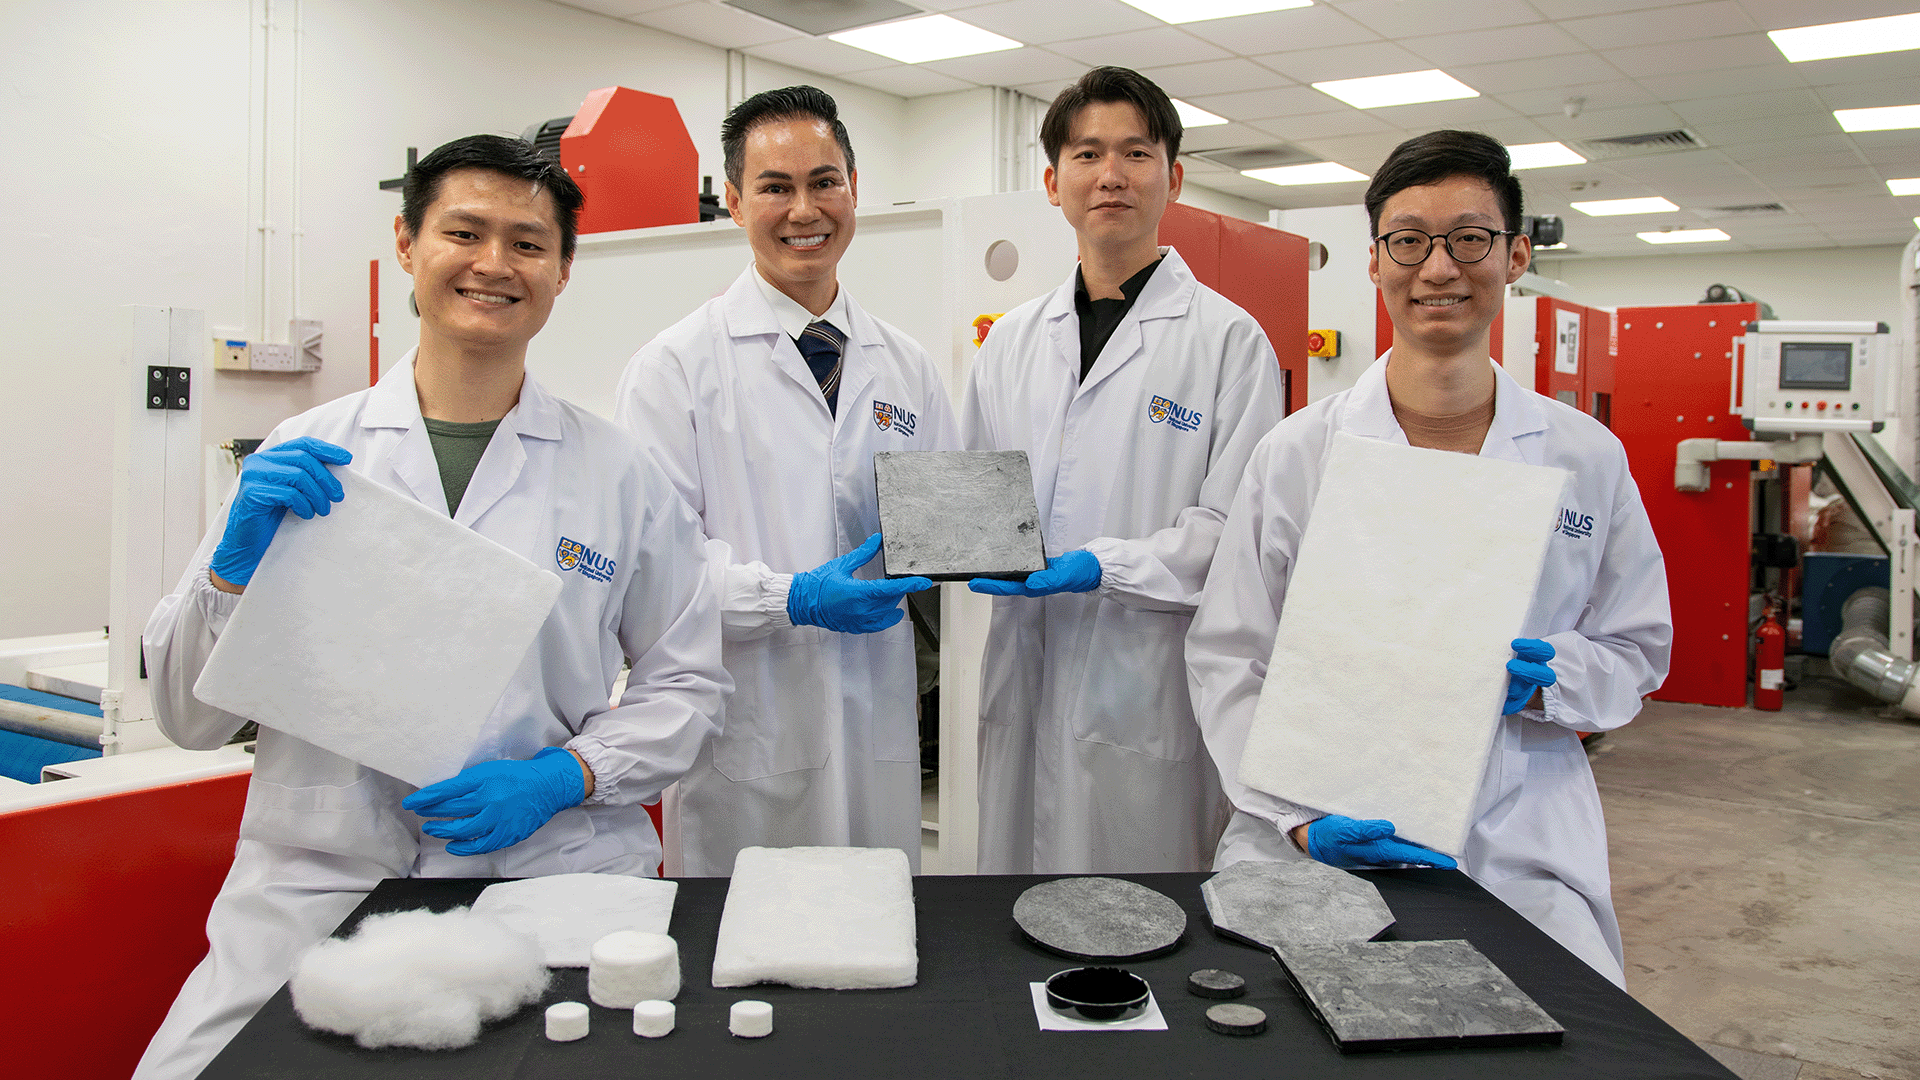 Assoc Prof Duong Hai-Minh (second from left) and his team – Mr Goh Xue Yang (first from left), Mr Nguyen Tan Luon (third from left), and Mr Bai Tianliang (extreme right) – developed innovative aerogels for radiative cooling (white aerogels) and absorption of electromagnetic waves (grey aerogels).